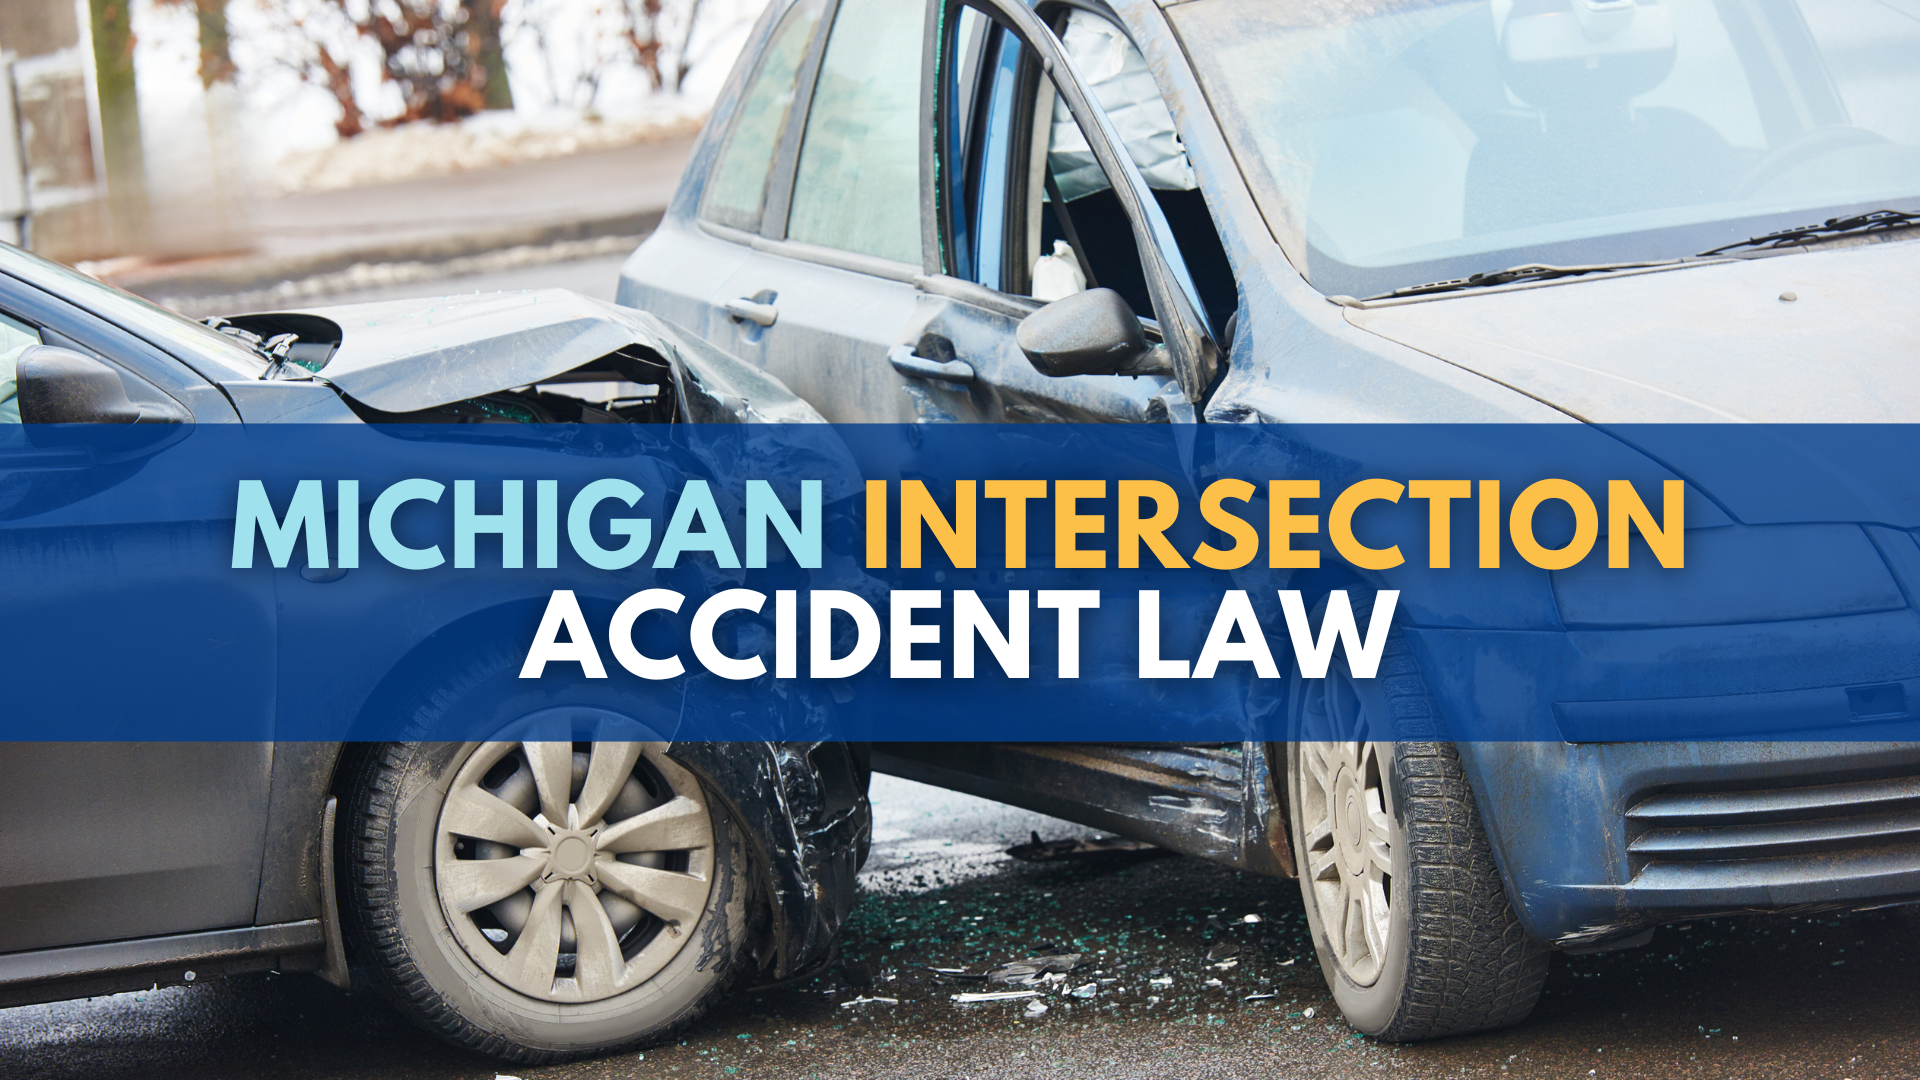 Michigan intersections accident law: what you need to know